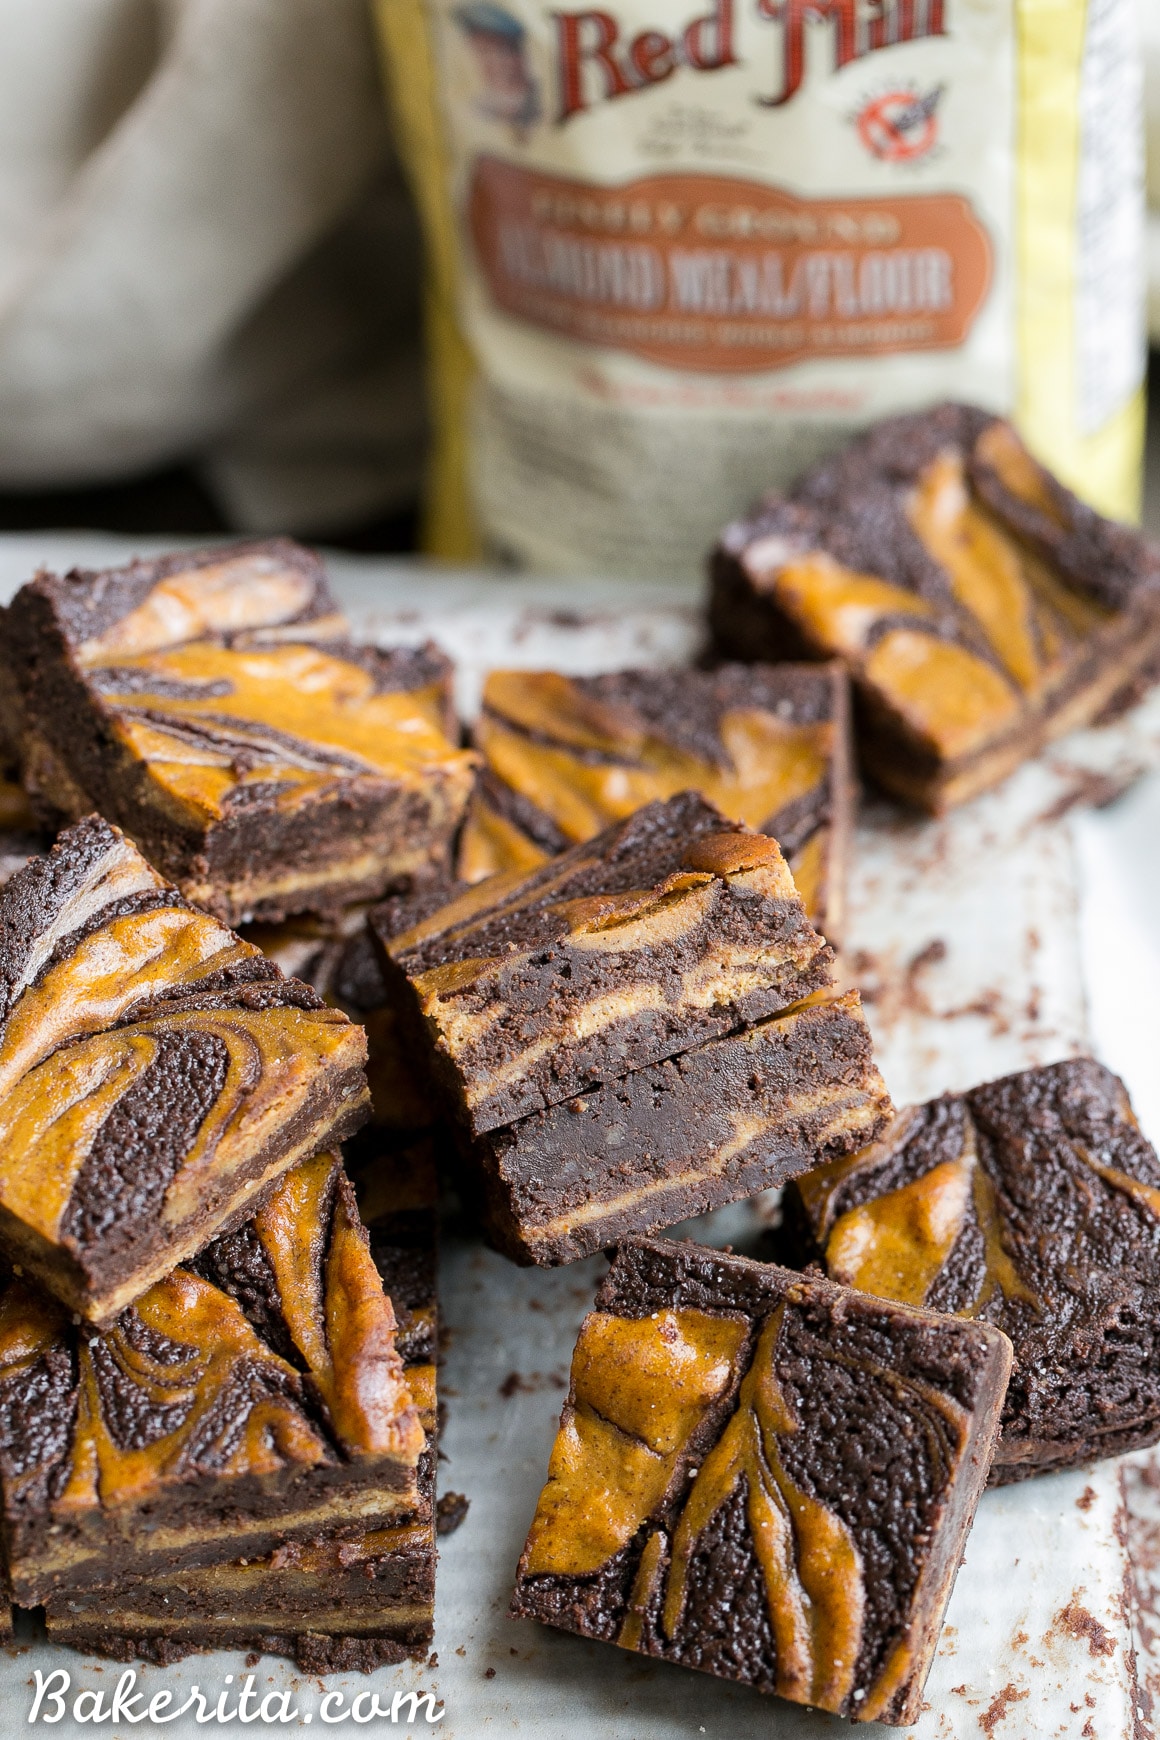 These Pumpkin Cheesecake Brownies are moist + fudgy brownies with a swirled layer of spiced pumpkin cheesecake! These brownies are gluten-free and refined sugar free.